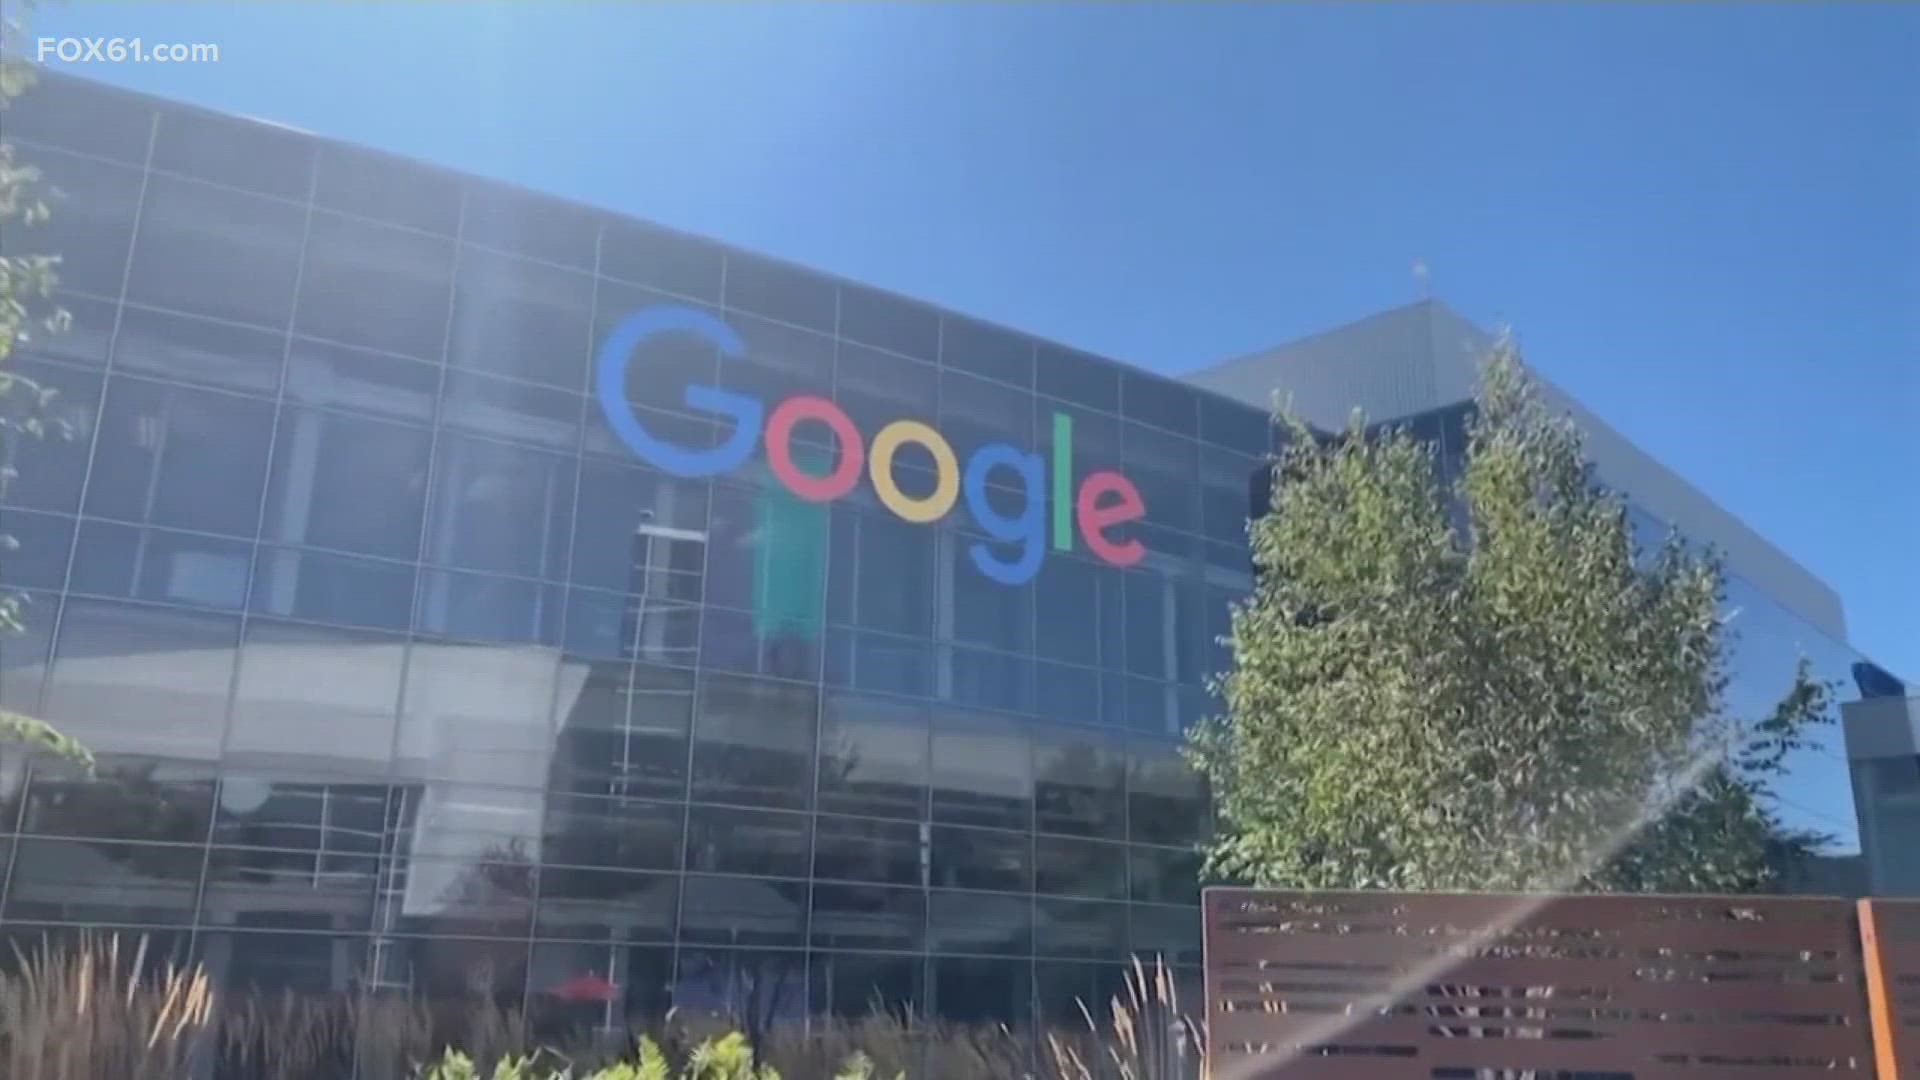 Connecticut and other states reached a settlement over how Google collects information.